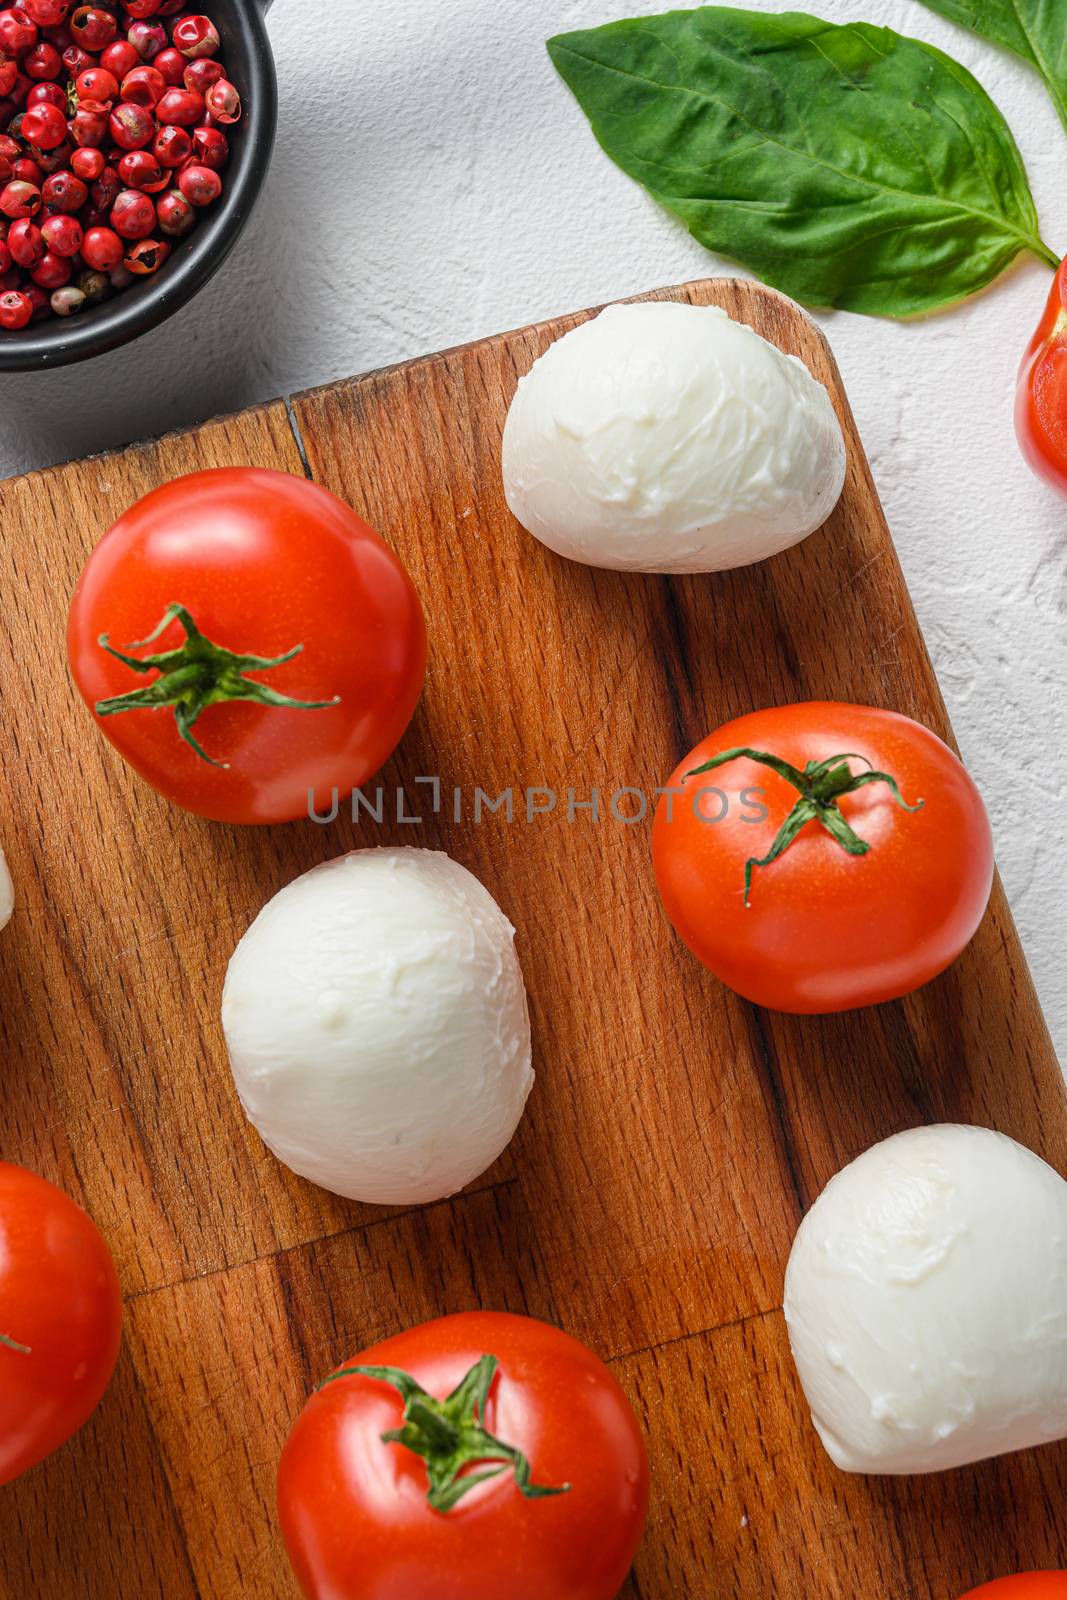 Mini balls of mozzarella cheese, on chop wood board ingredients for salad Caprese. over white background. close up selective focus vertical.